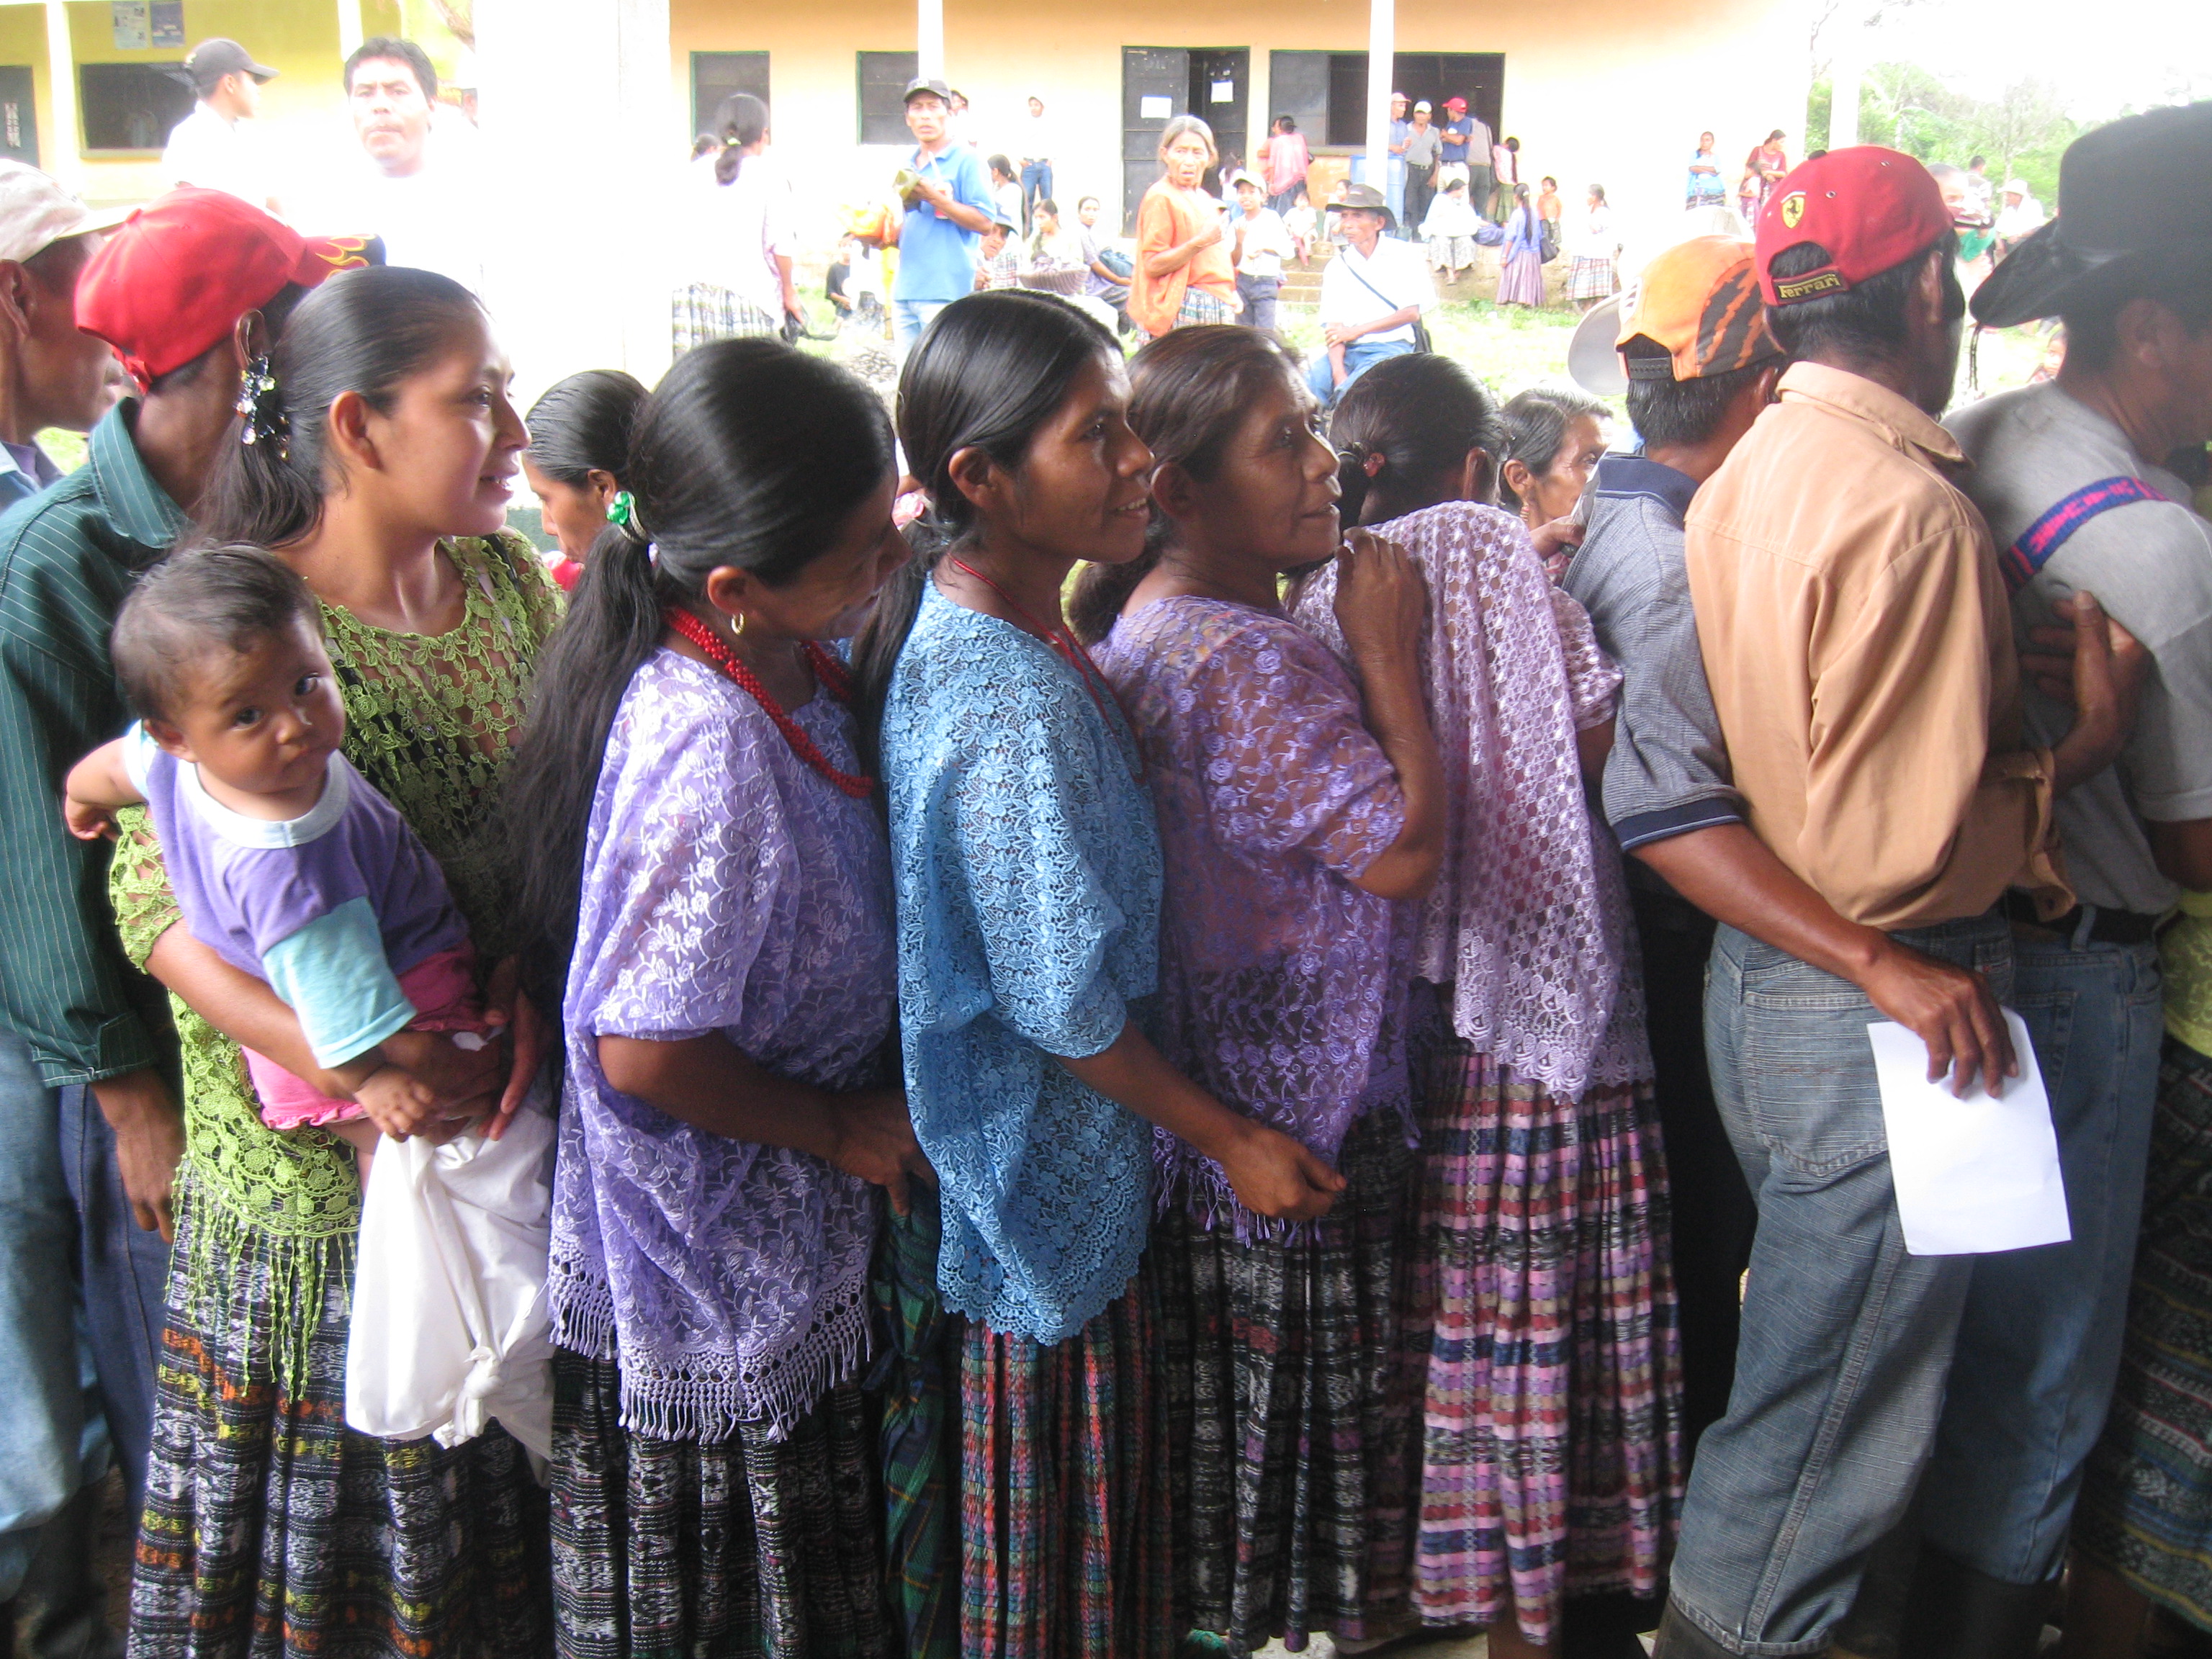 Hundreds of people lining up to be seen at the 3-day Seva eye camp in the remote village of Chilten, Guatemala. Photo by Laura Spencer